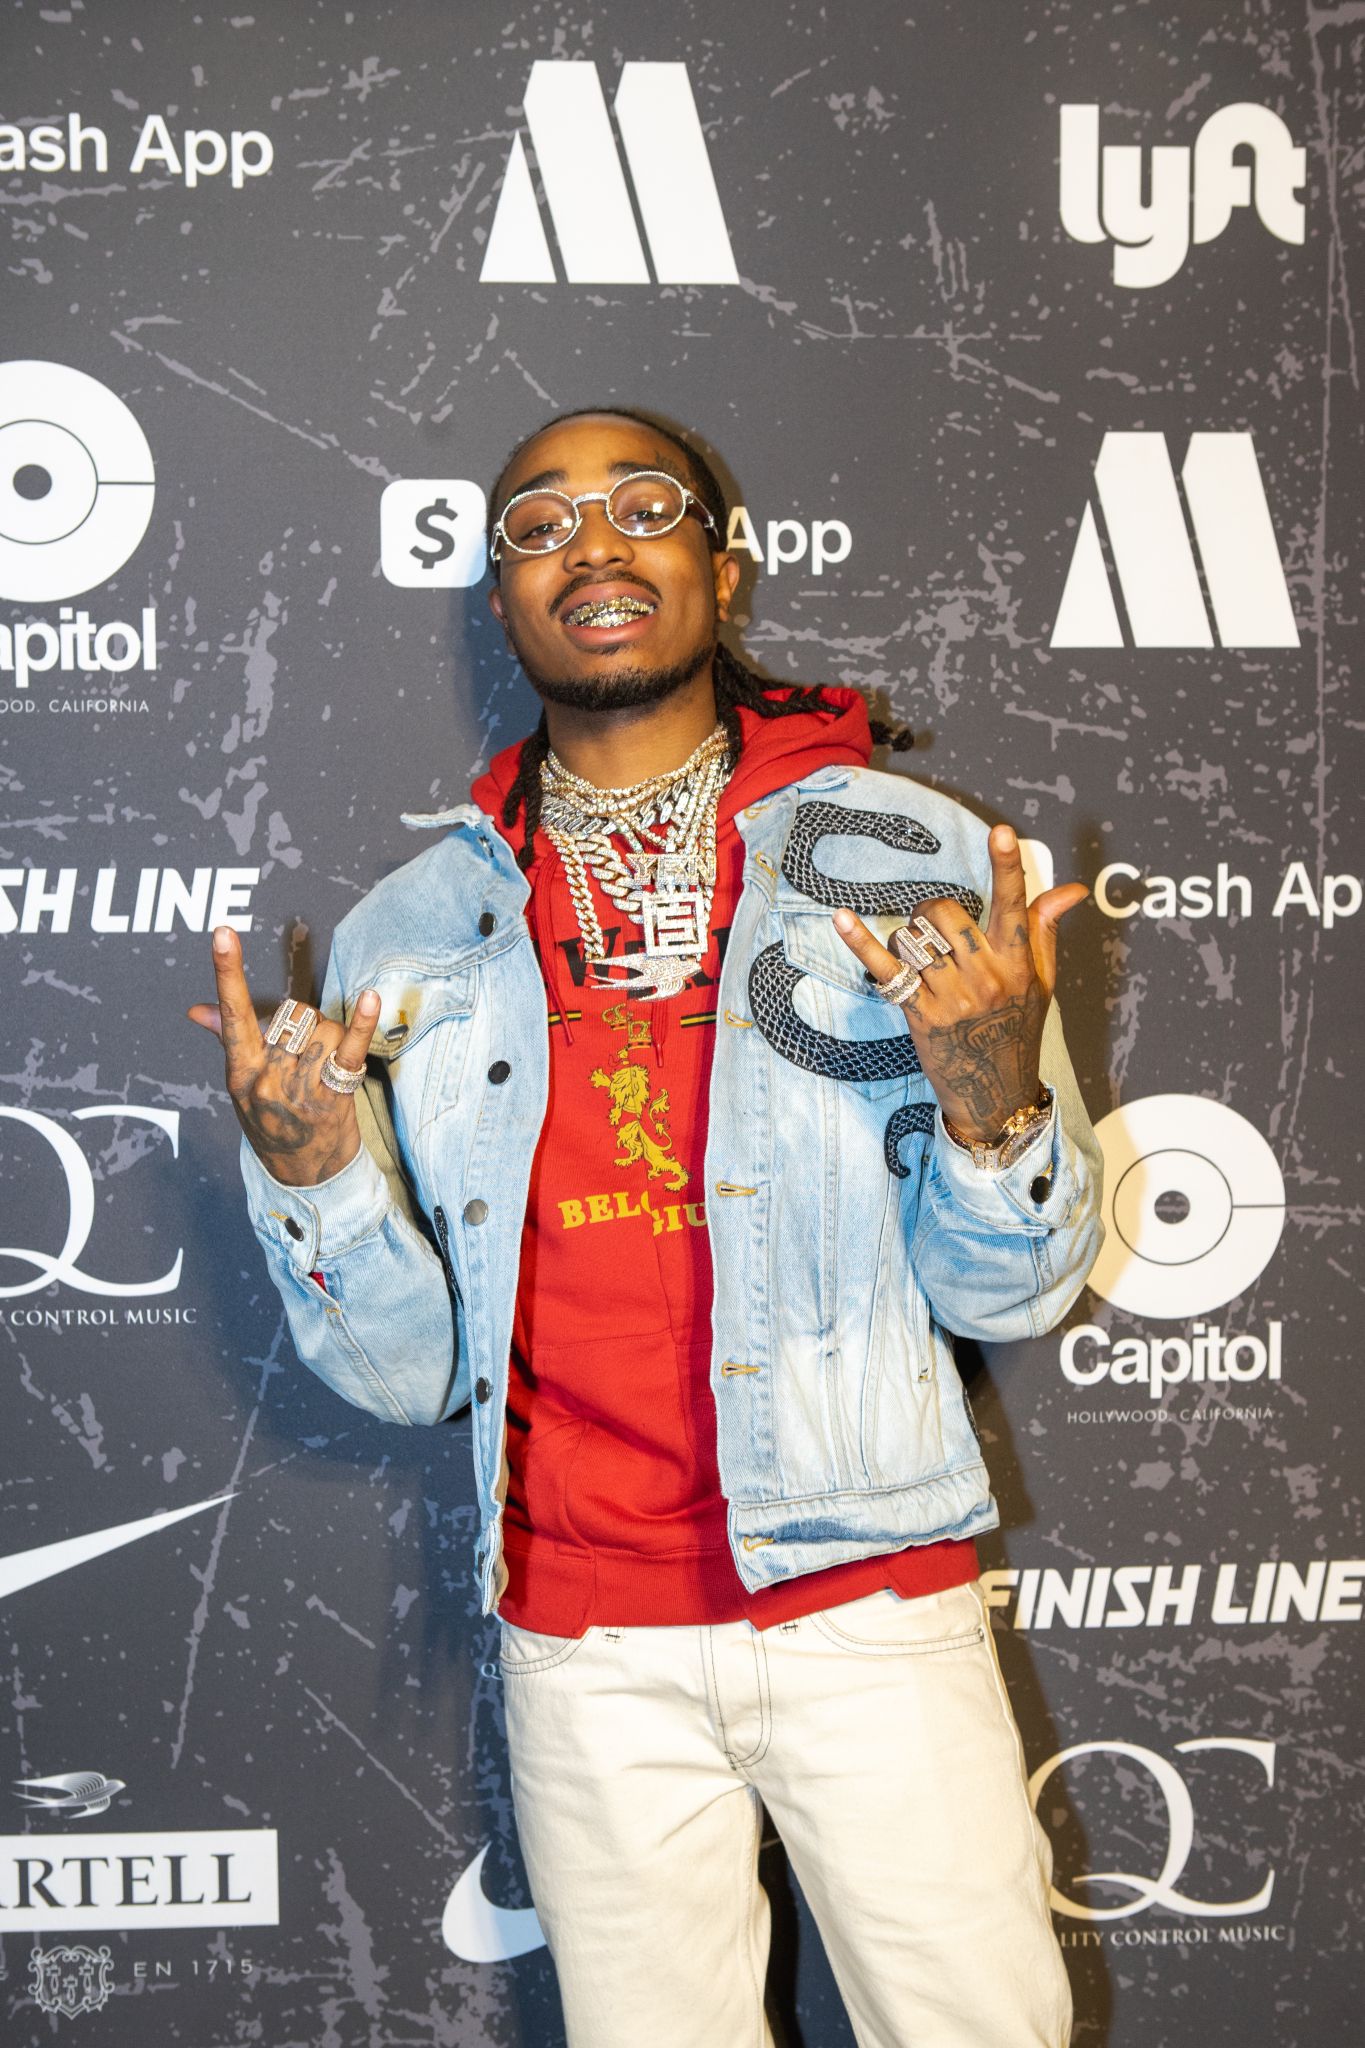 Migos Perform At Quality Control And Motown Records Event - Bossip